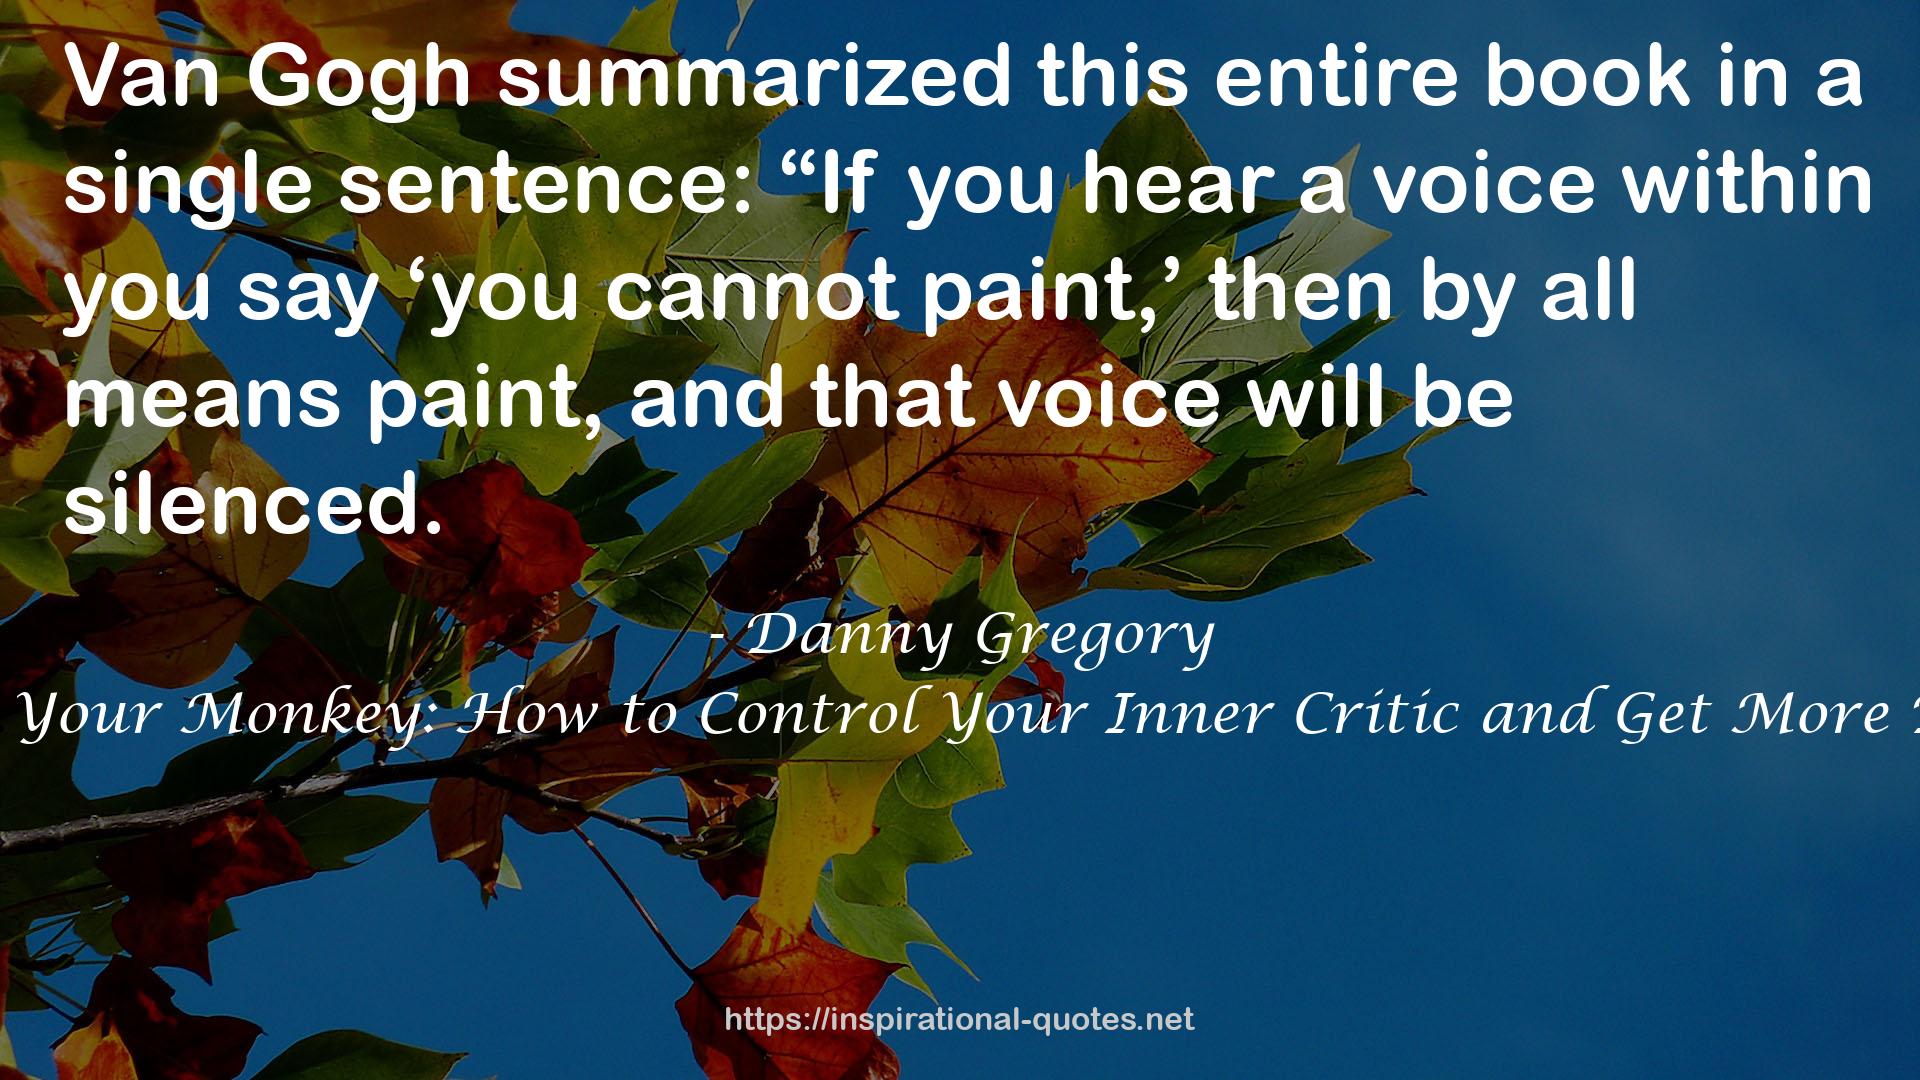 Shut Your Monkey: How to Control Your Inner Critic and Get More Done QUOTES